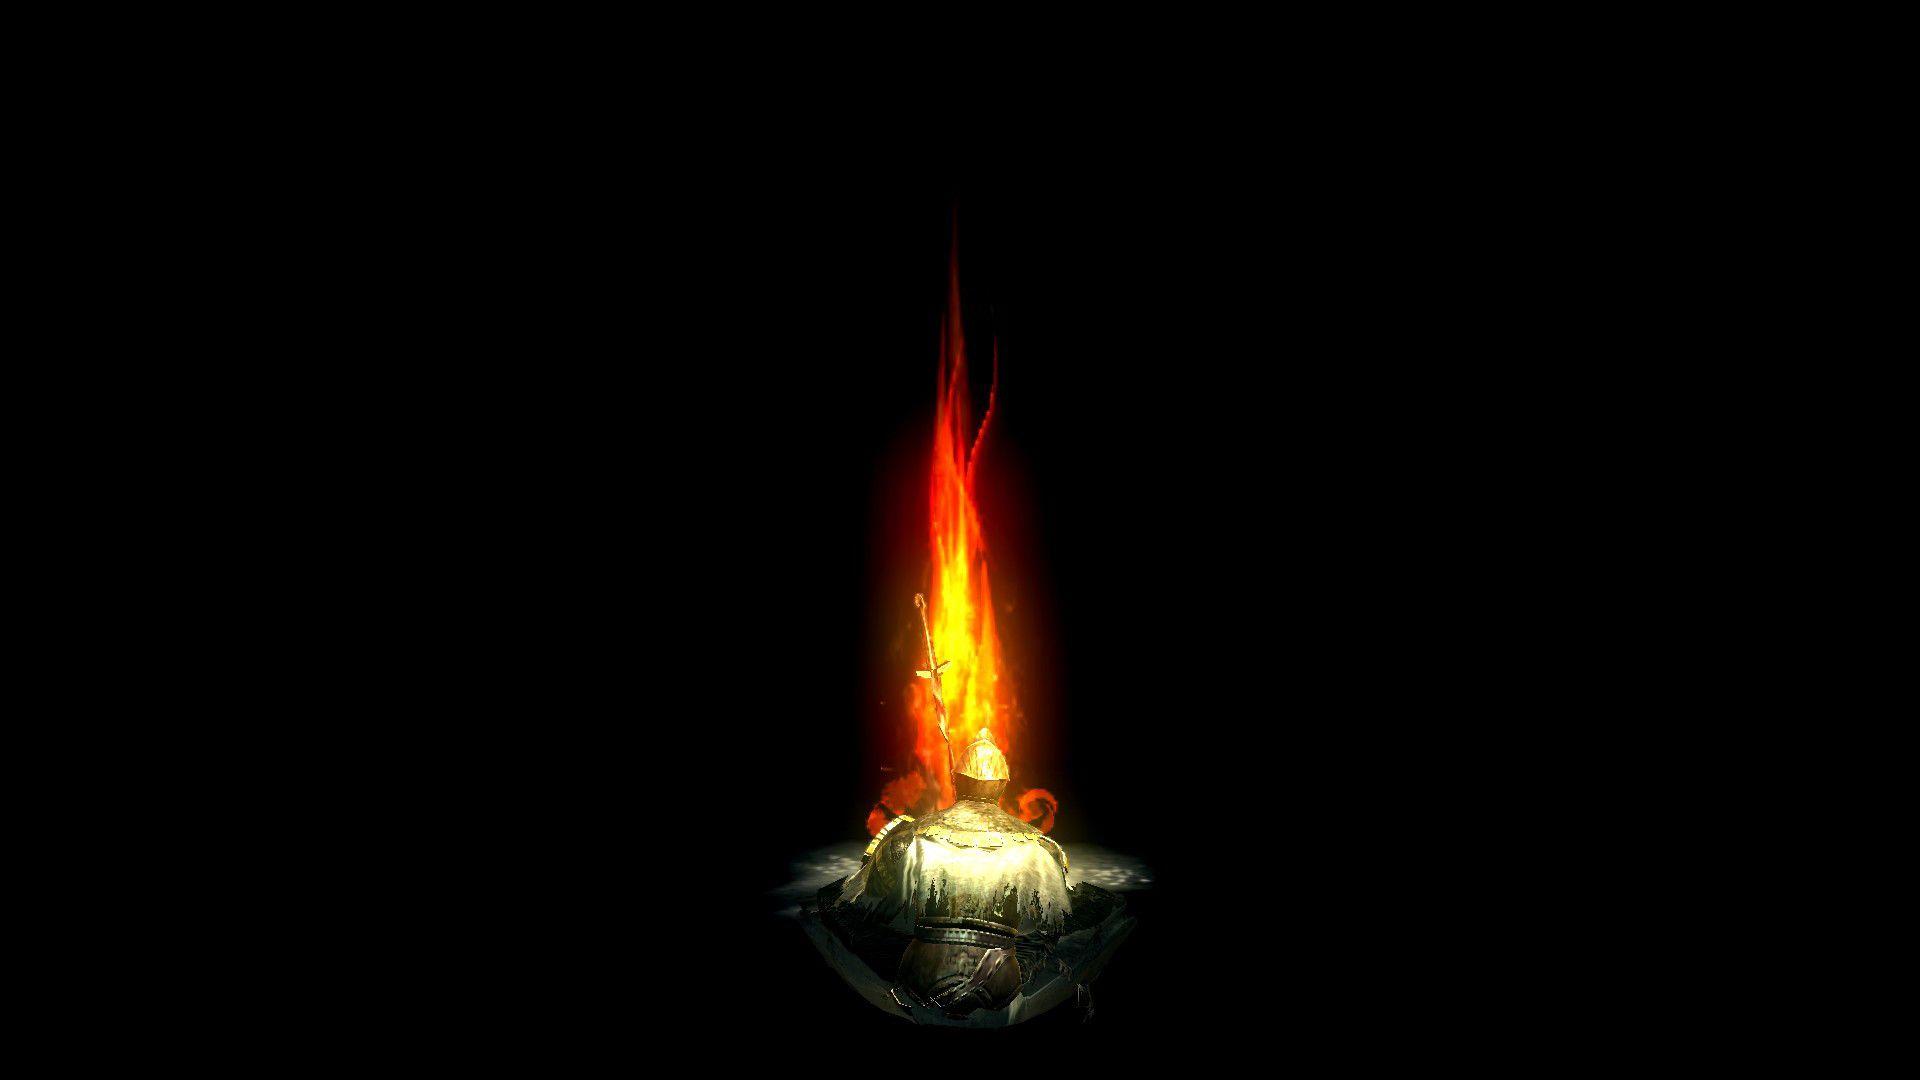 Featured image of post 1440P Dark Souls Bonfire Wallpaper Darksouls desktop background desktop background from the above display resolutions for popular fullscreen widescreen mobile android tablet ipad iphone ipod